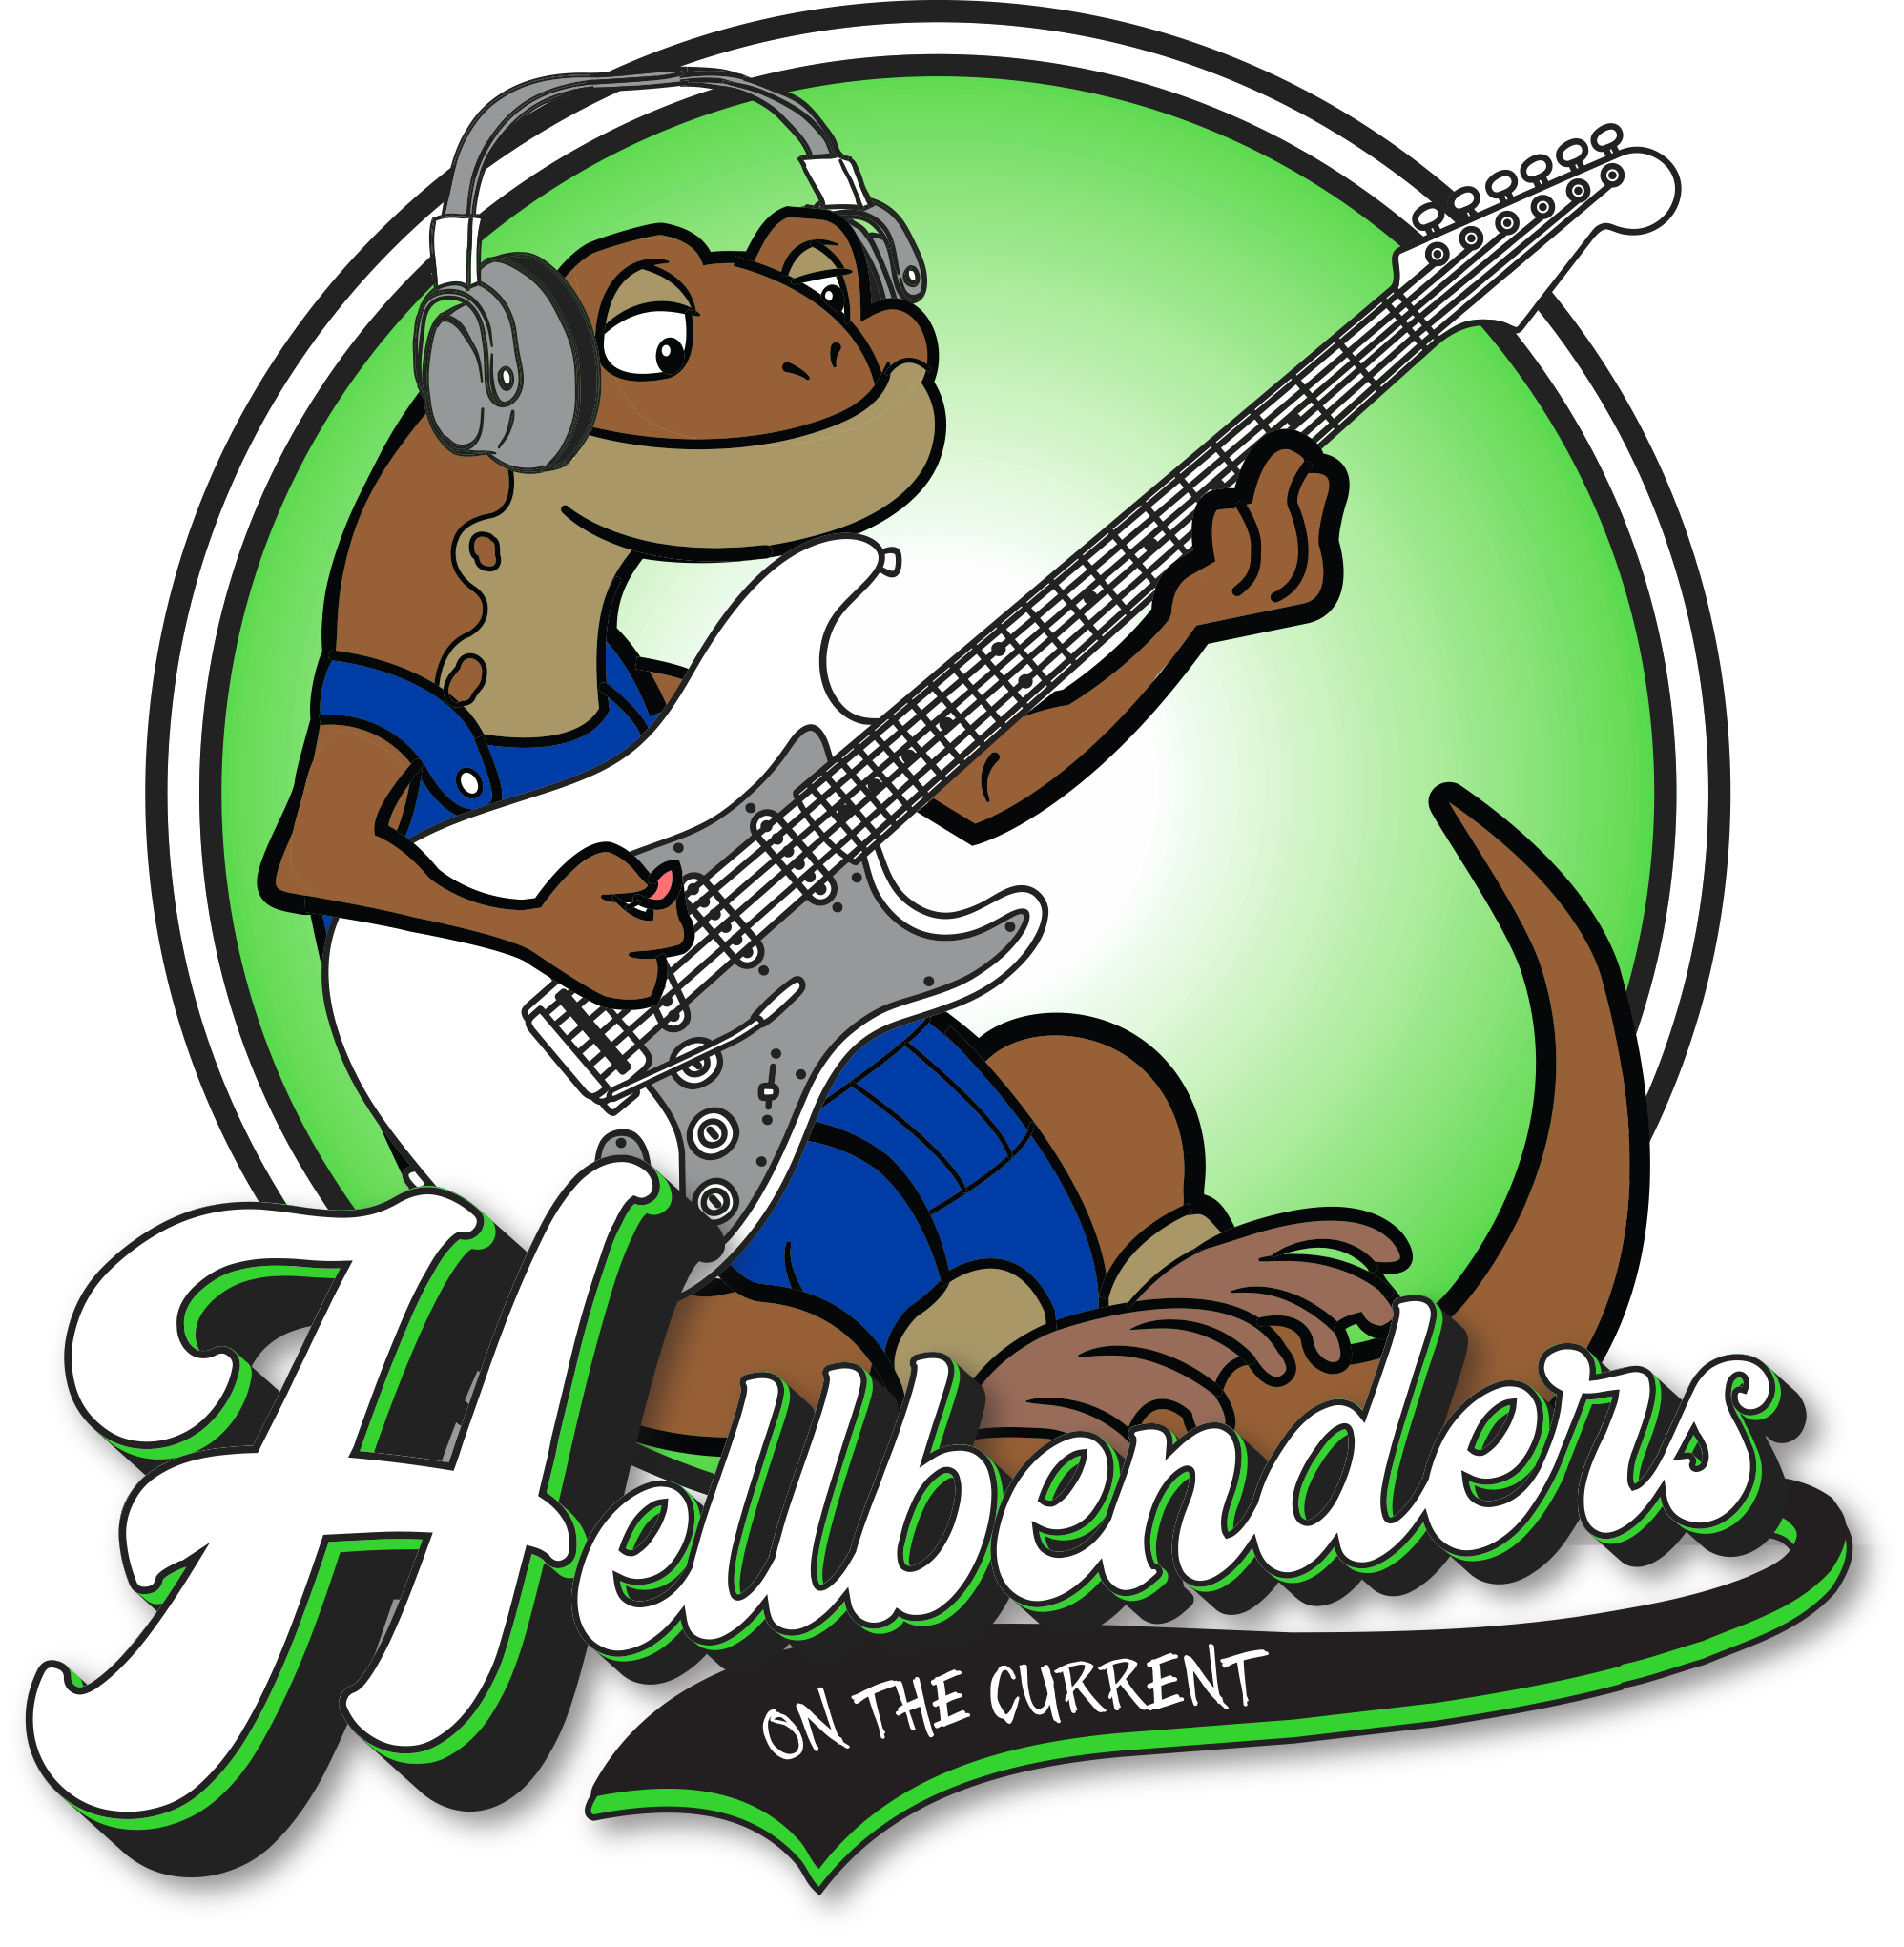 Hellbender's On the Current